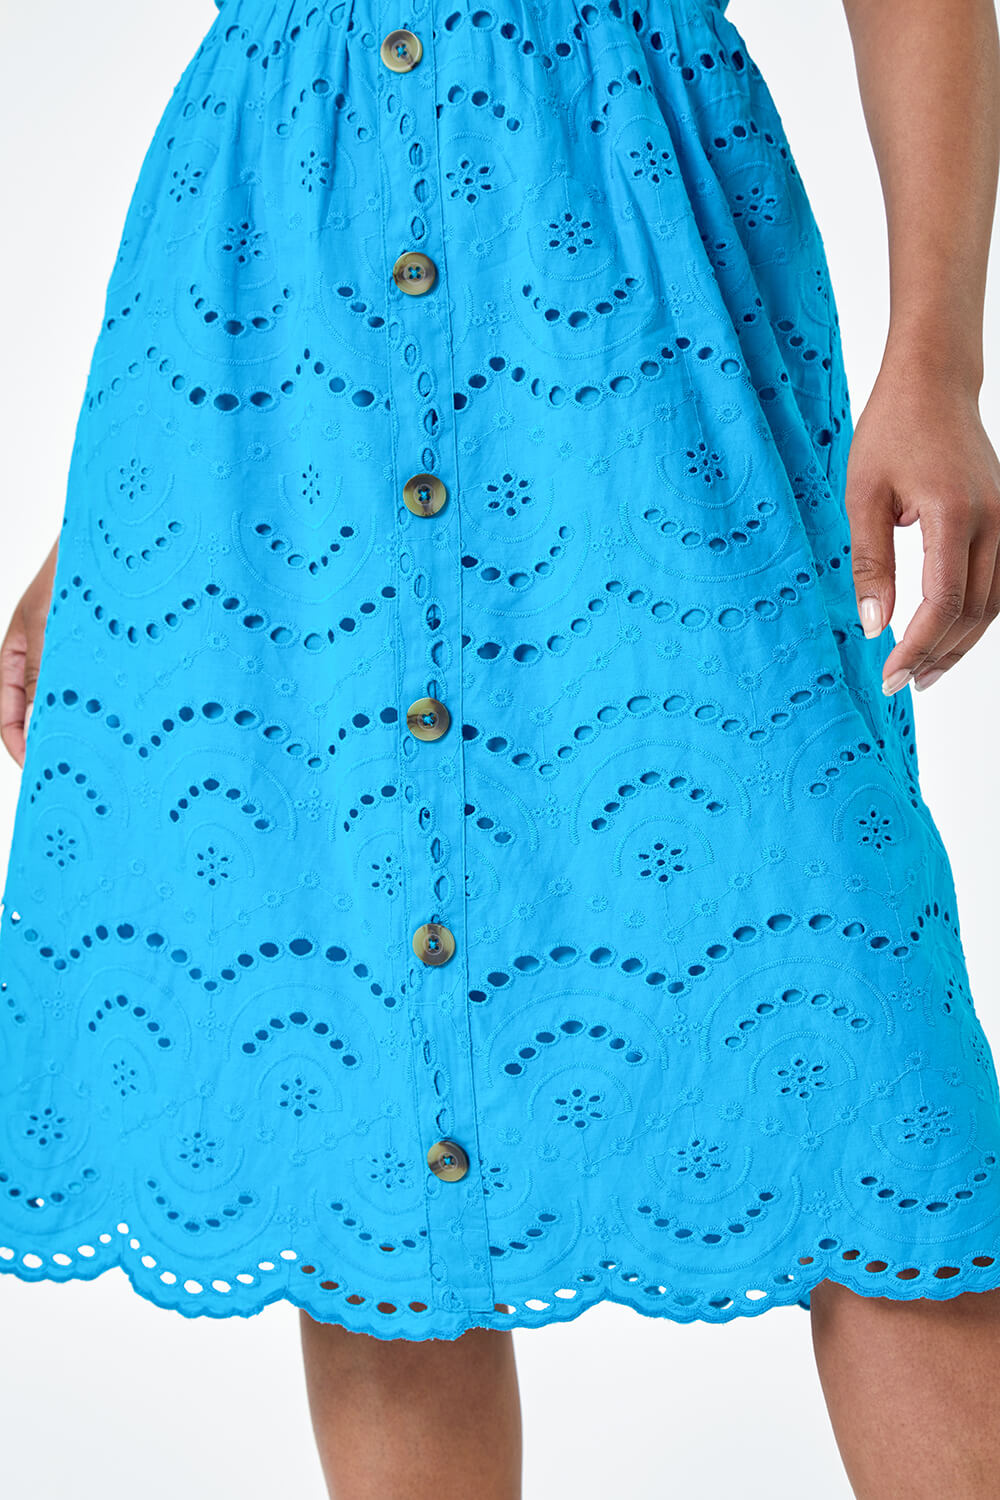 Turquoise Petite Cotton Broderie Button Dress, Image 5 of 5